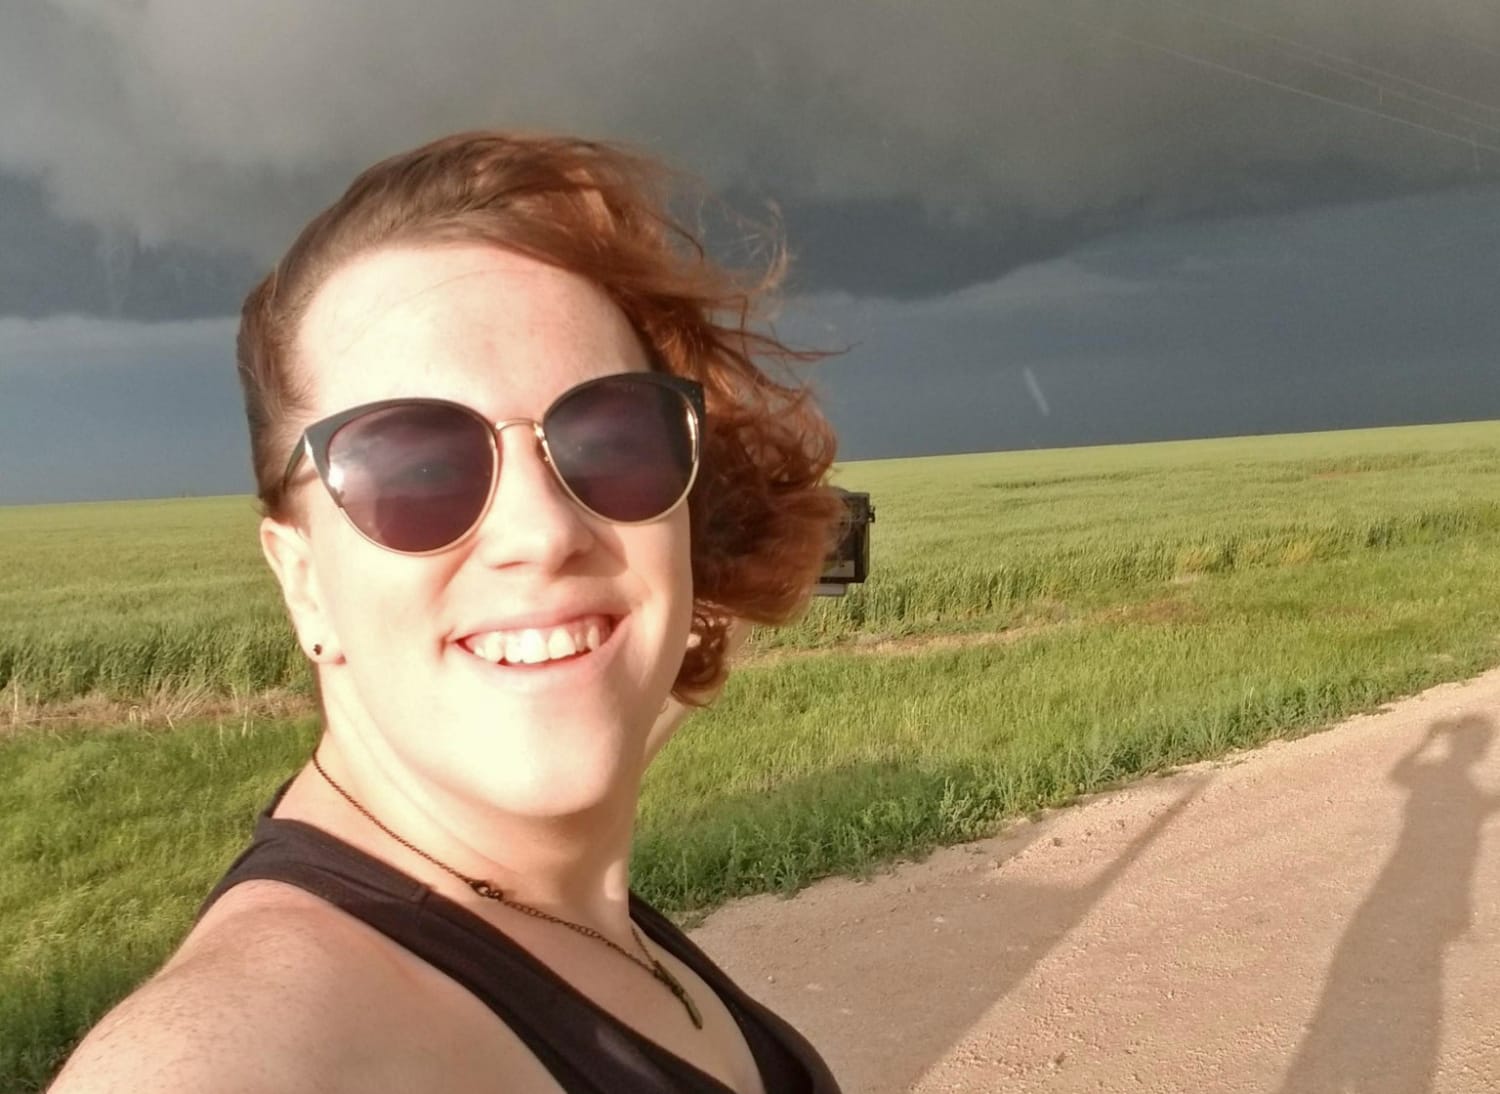 She’s escaped death while chasing storms, but ‘lost most everybody’ after coming out